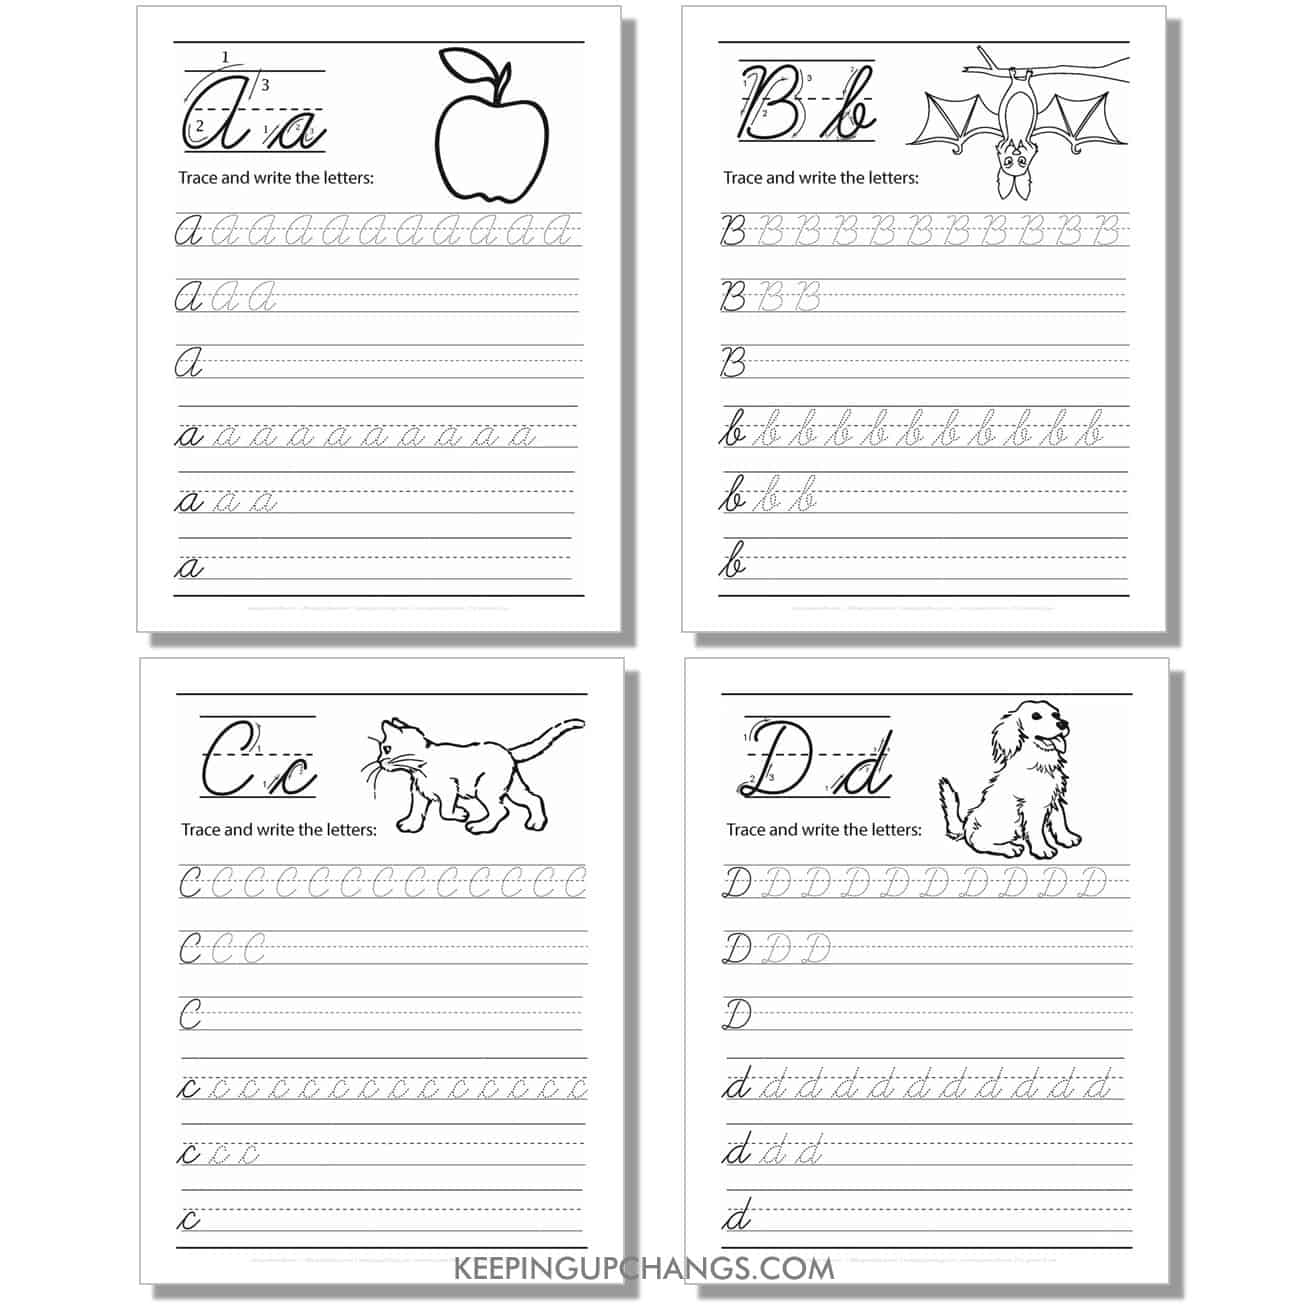 cursive worksheet with uppercase, lowercase letters for a, b, c, d.